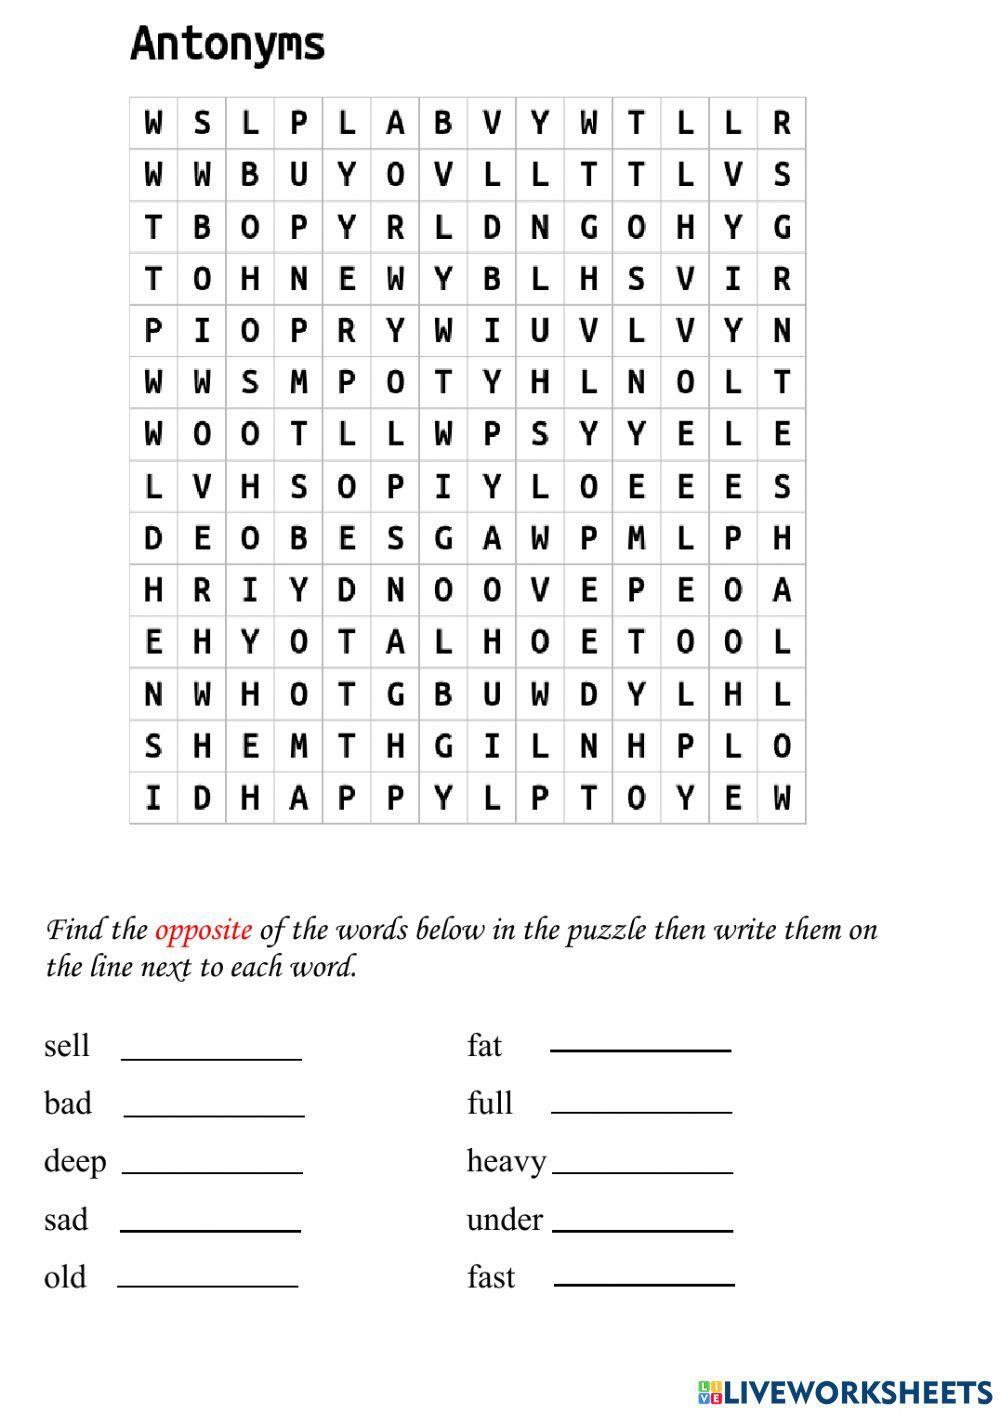 Antonyms Word Search